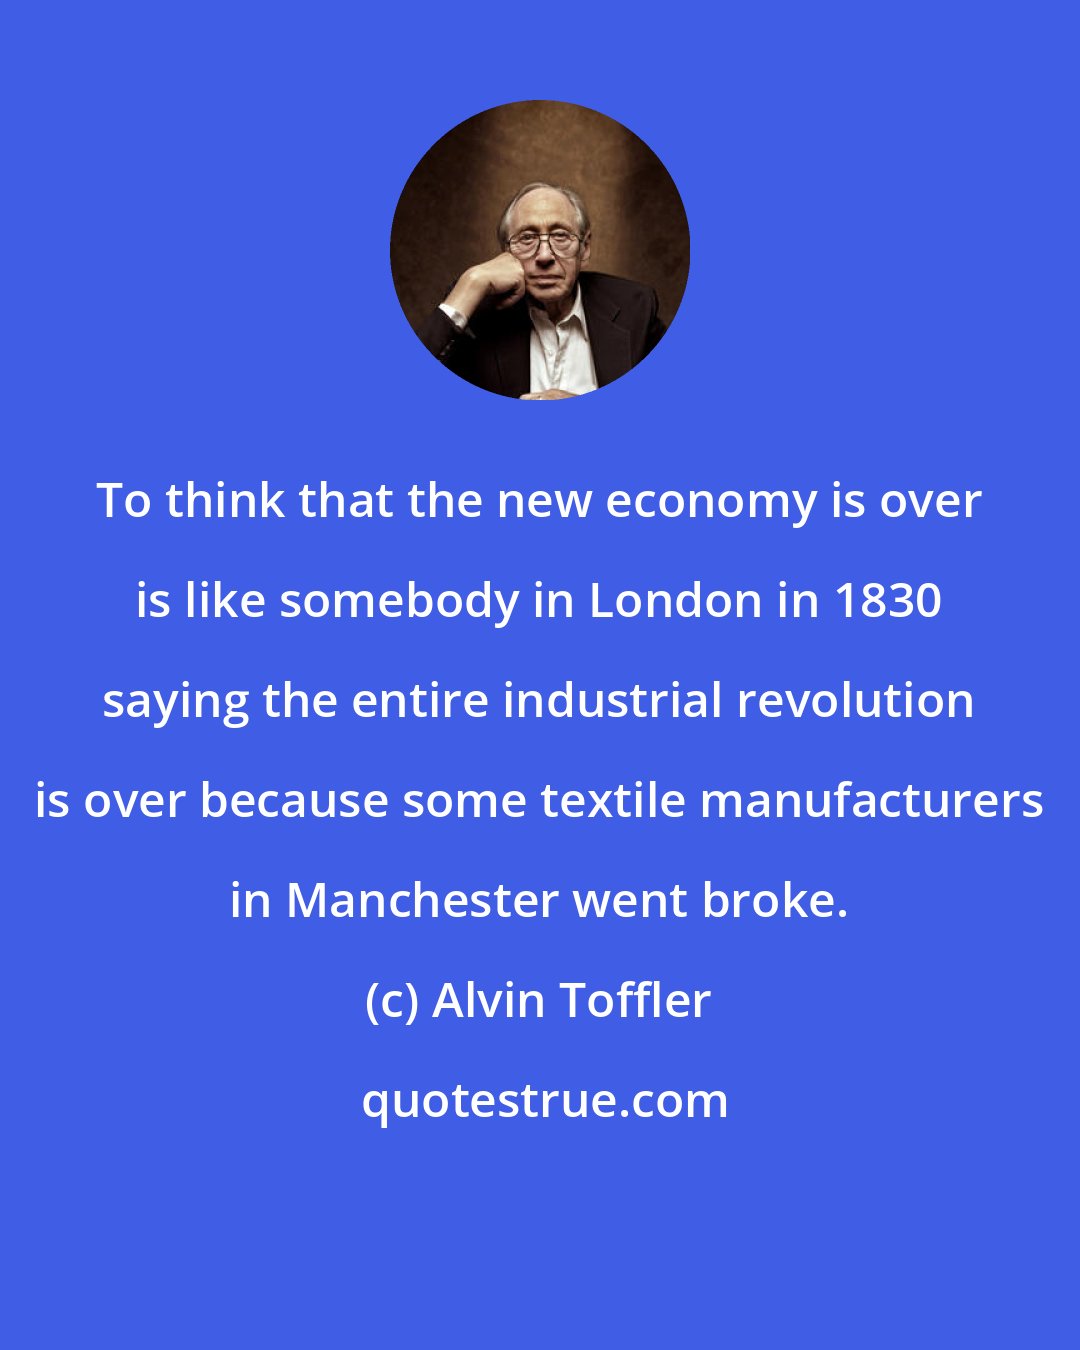 Alvin Toffler: To think that the new economy is over is like somebody in London in 1830 saying the entire industrial revolution is over because some textile manufacturers in Manchester went broke.